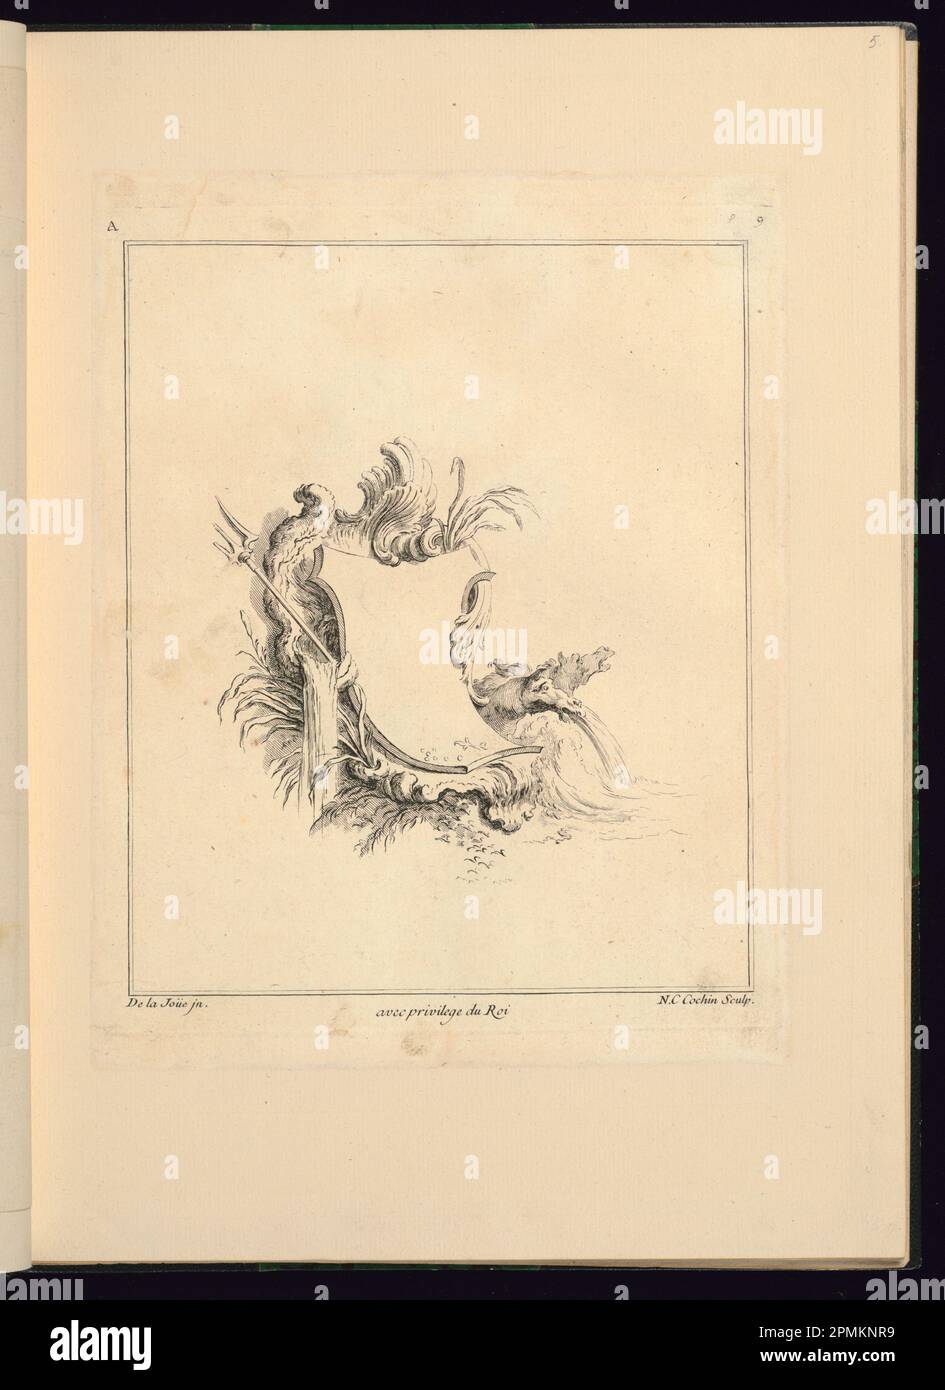 Print, Design for Cartouche Evoking the Sea; Designed by Jacques de Lajoüe (French, 1687–1761); Engraved by Charles Nicolas Cochin the younger (1715 - 1790); France; engraving on white laid paper; Platemark: 25.5 x 19 cm (10 1/16 x 7 1/2 in.) Sheet: 33.3 x 24.4 cm (13 1/8 x 9 5/8 in.), print is tipped into sheet Stock Photo